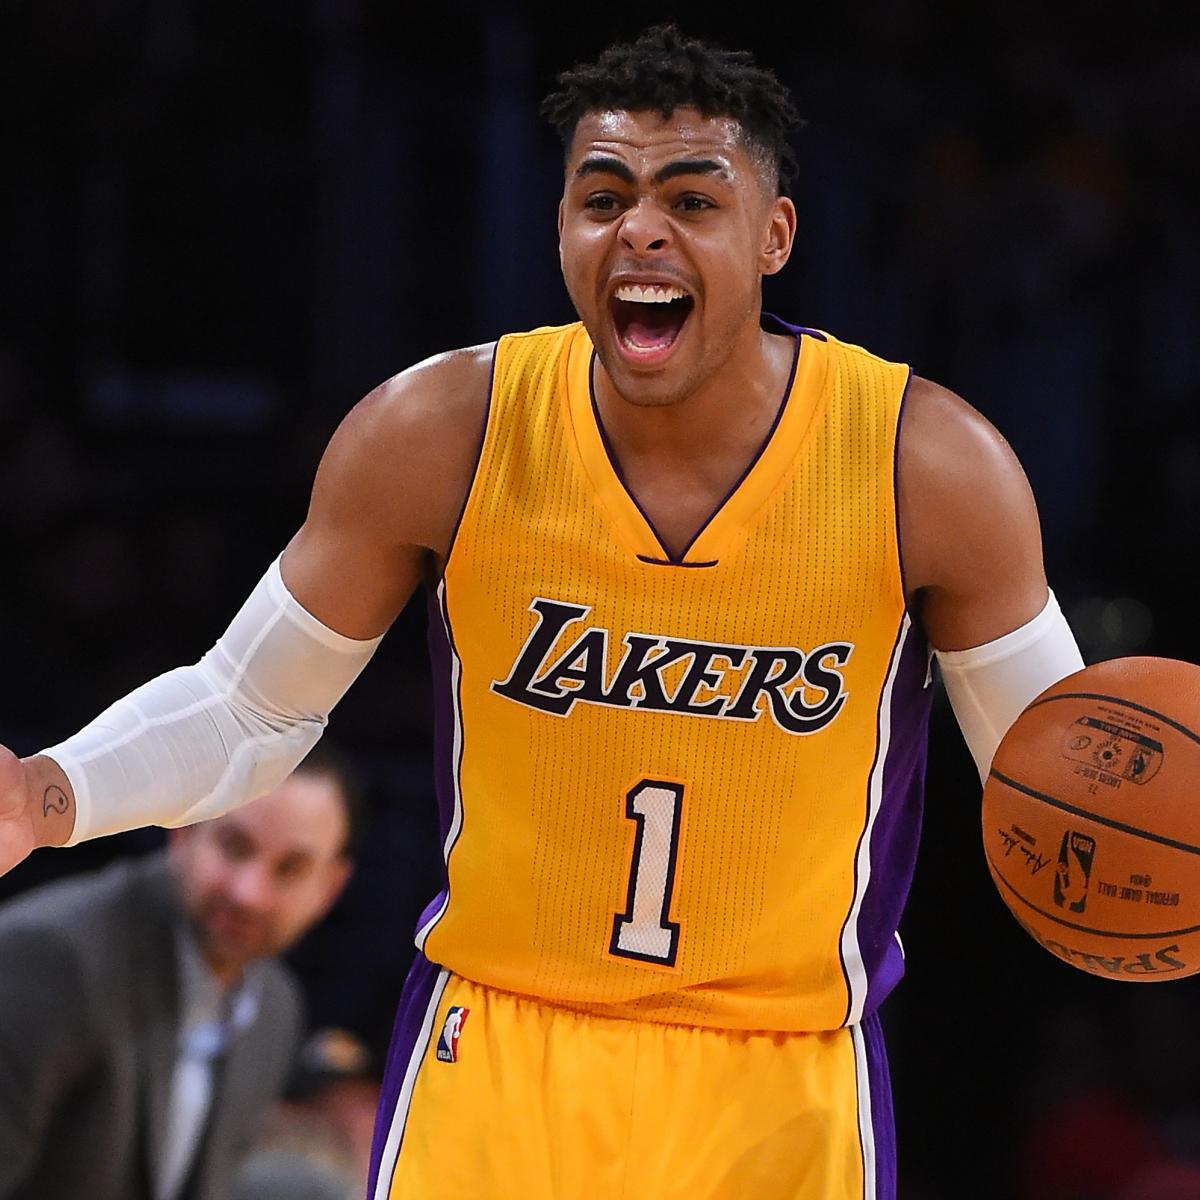 Los Angeles Lakers Complete 2016-17 NBA Season Preview